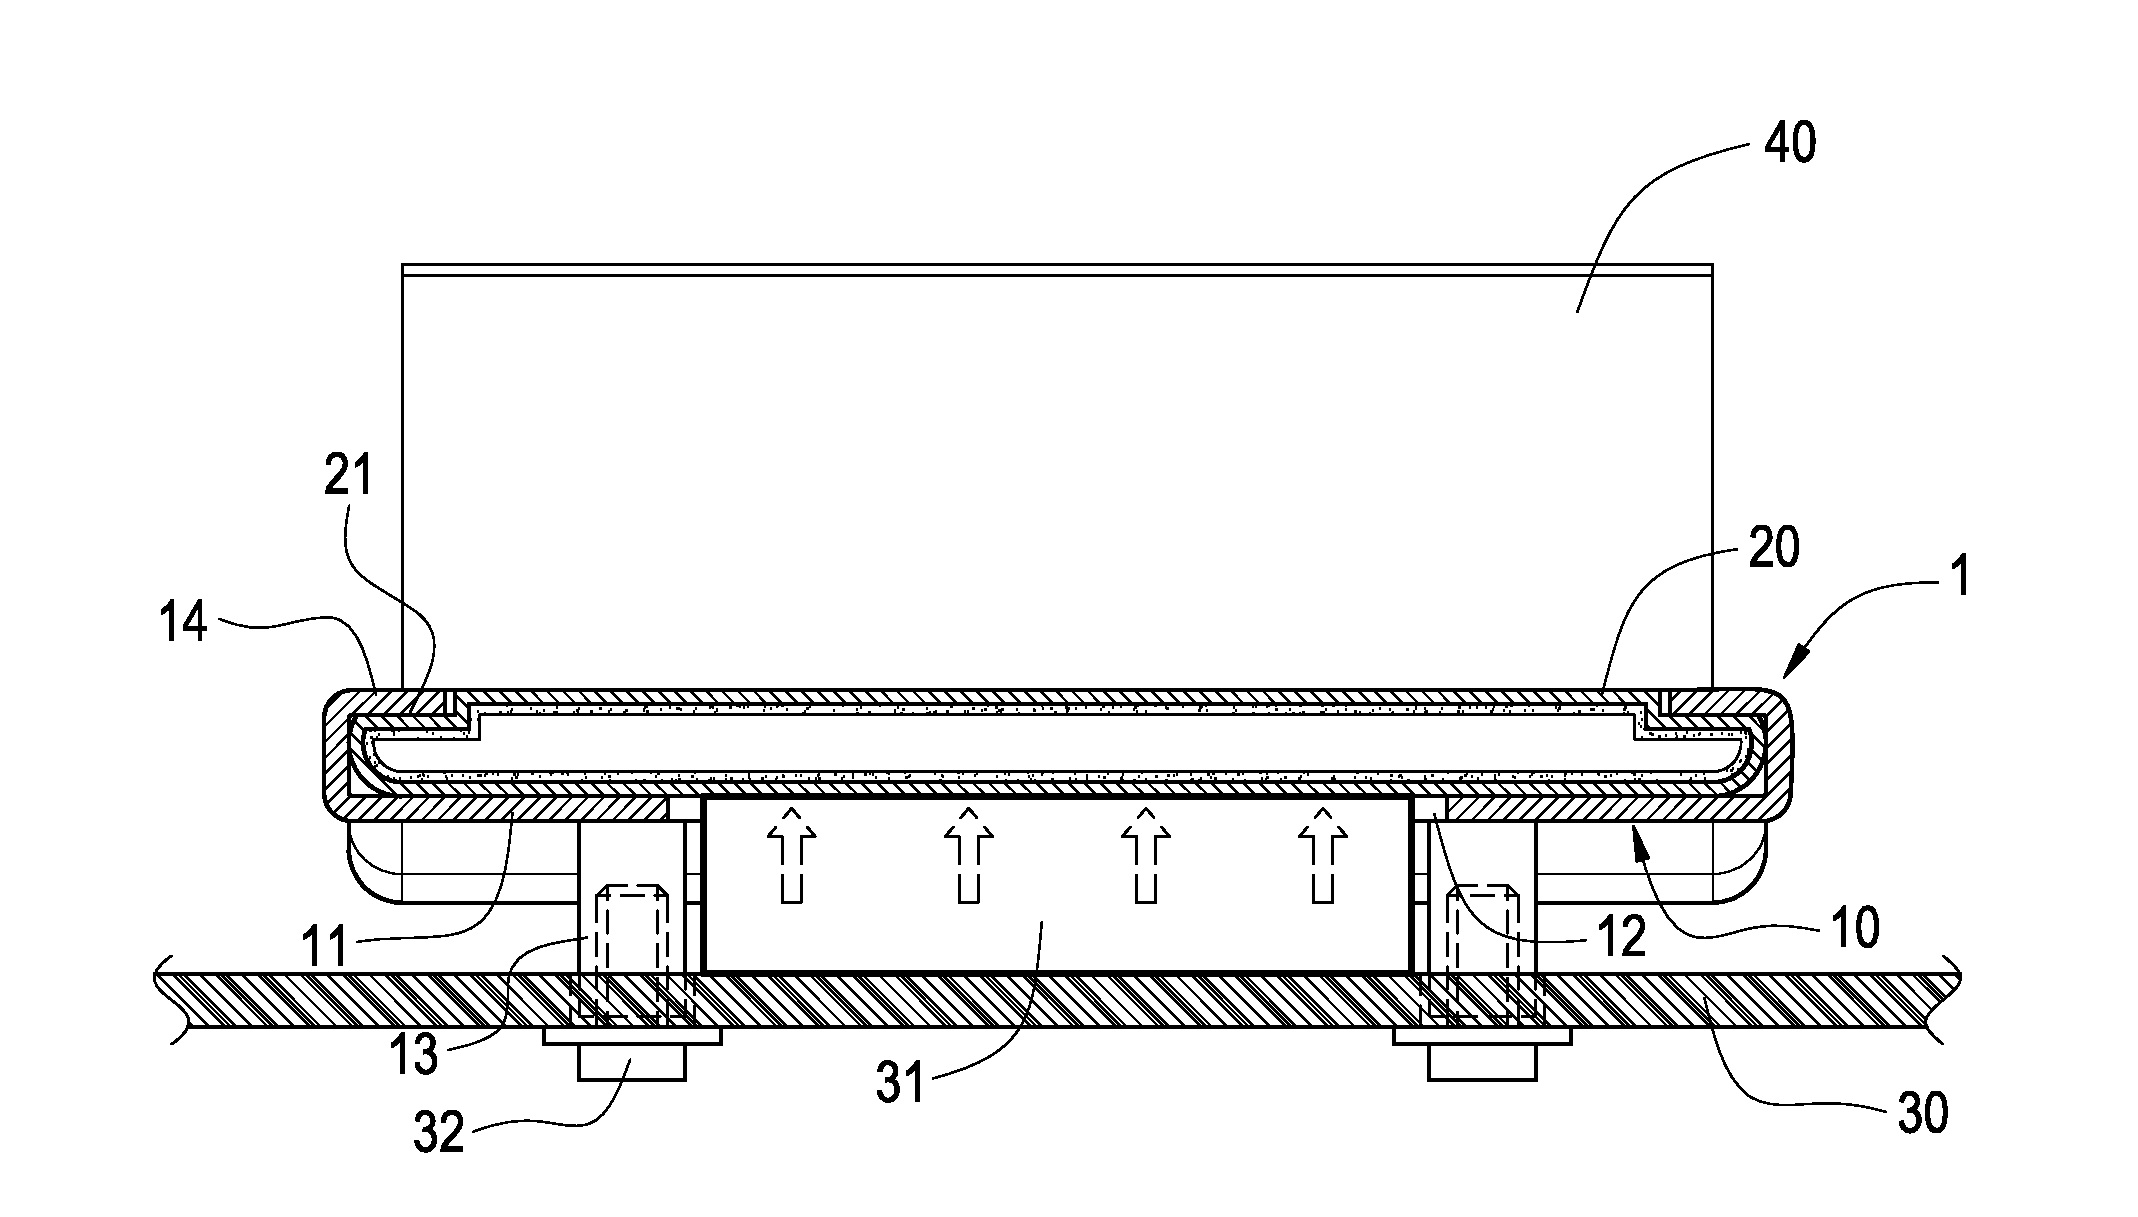 Combination of fastener and thermal-conducting member